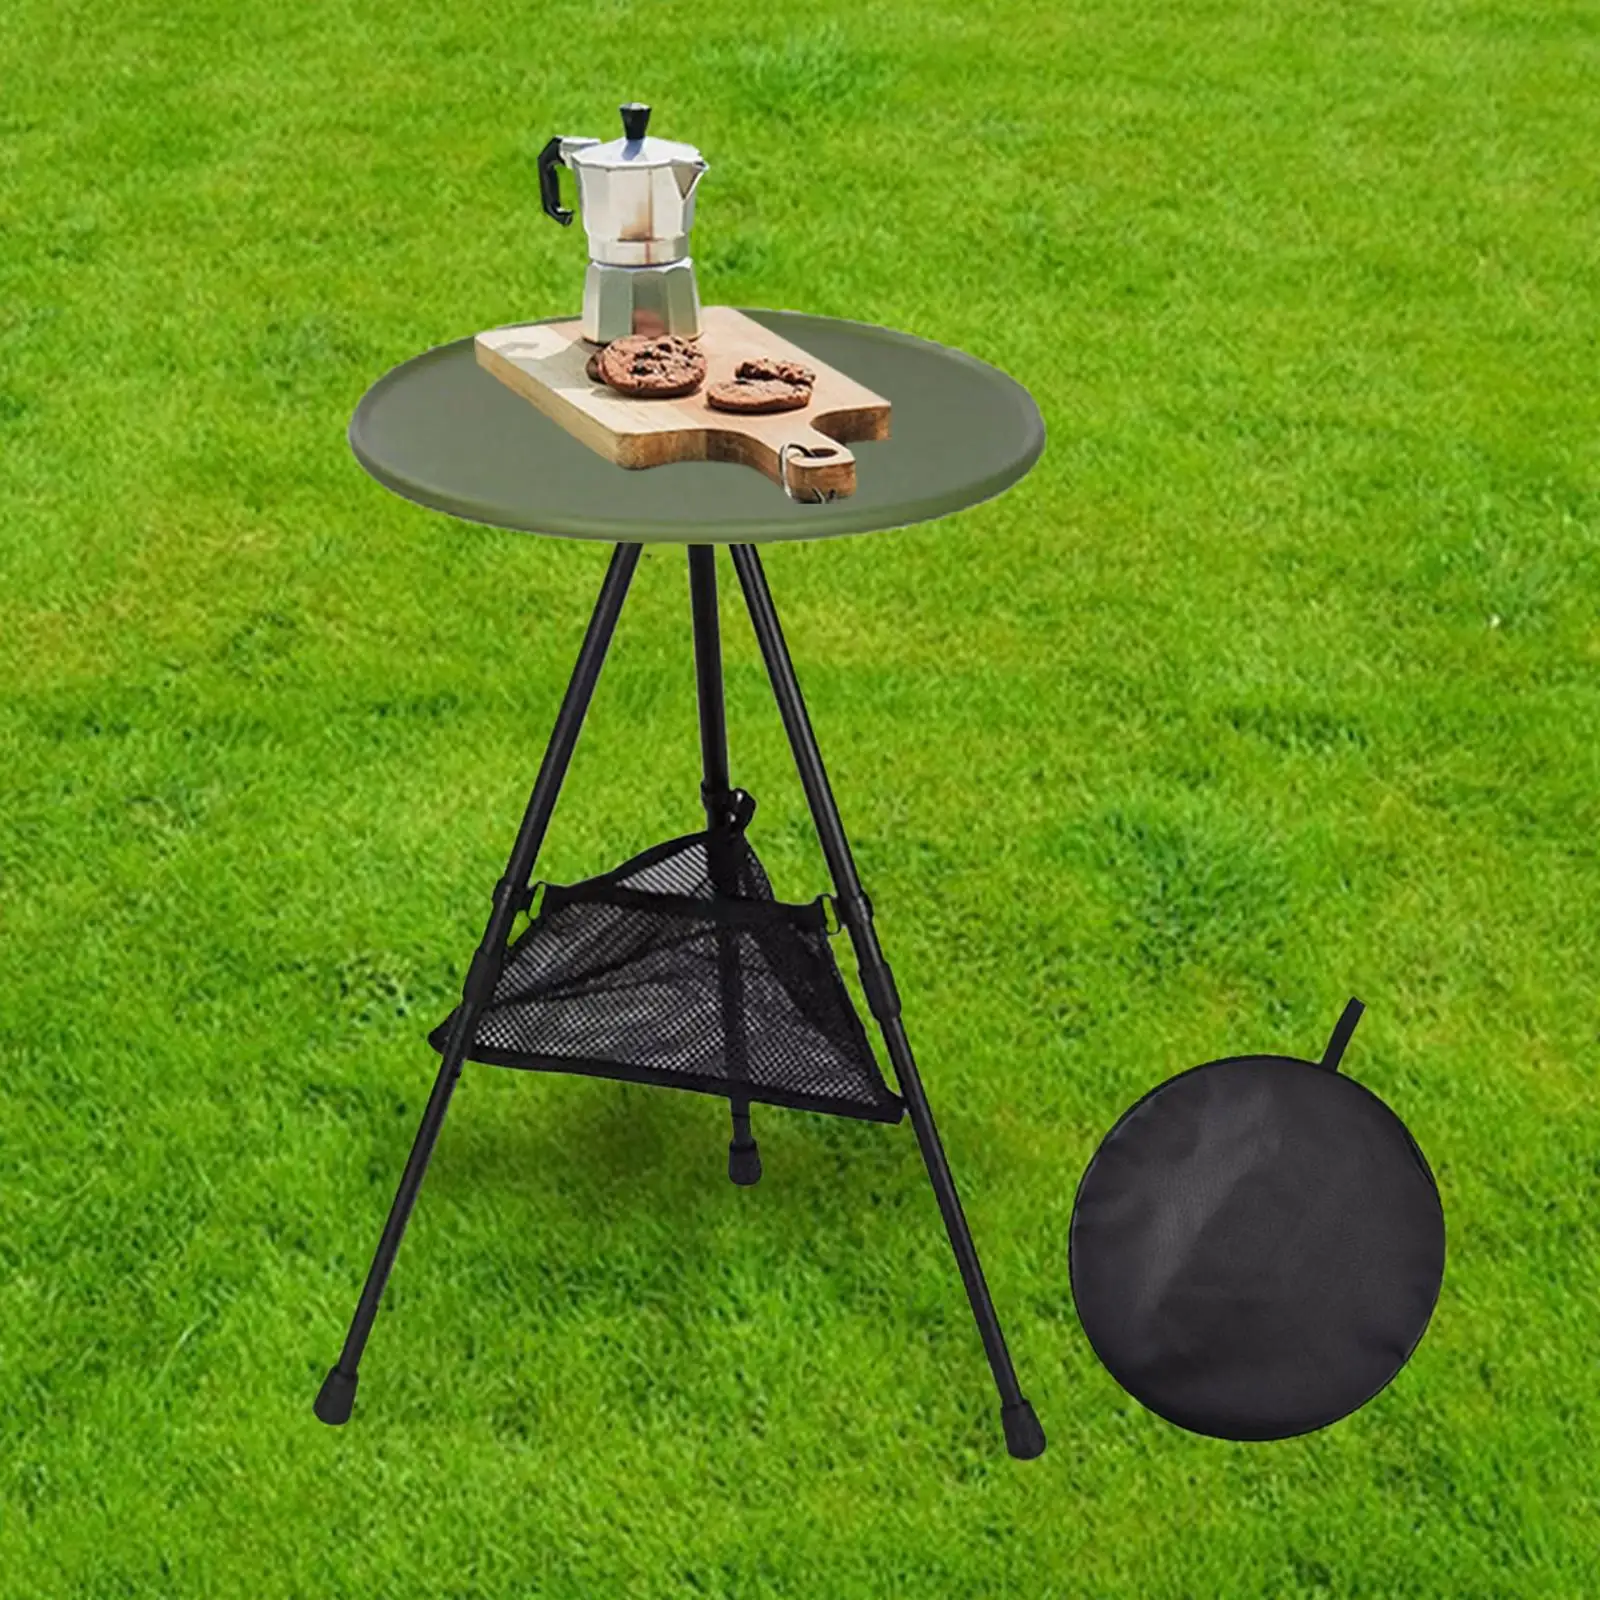 Outdoor Round Table Coffee Tea Table Small Foldable Picnic Table